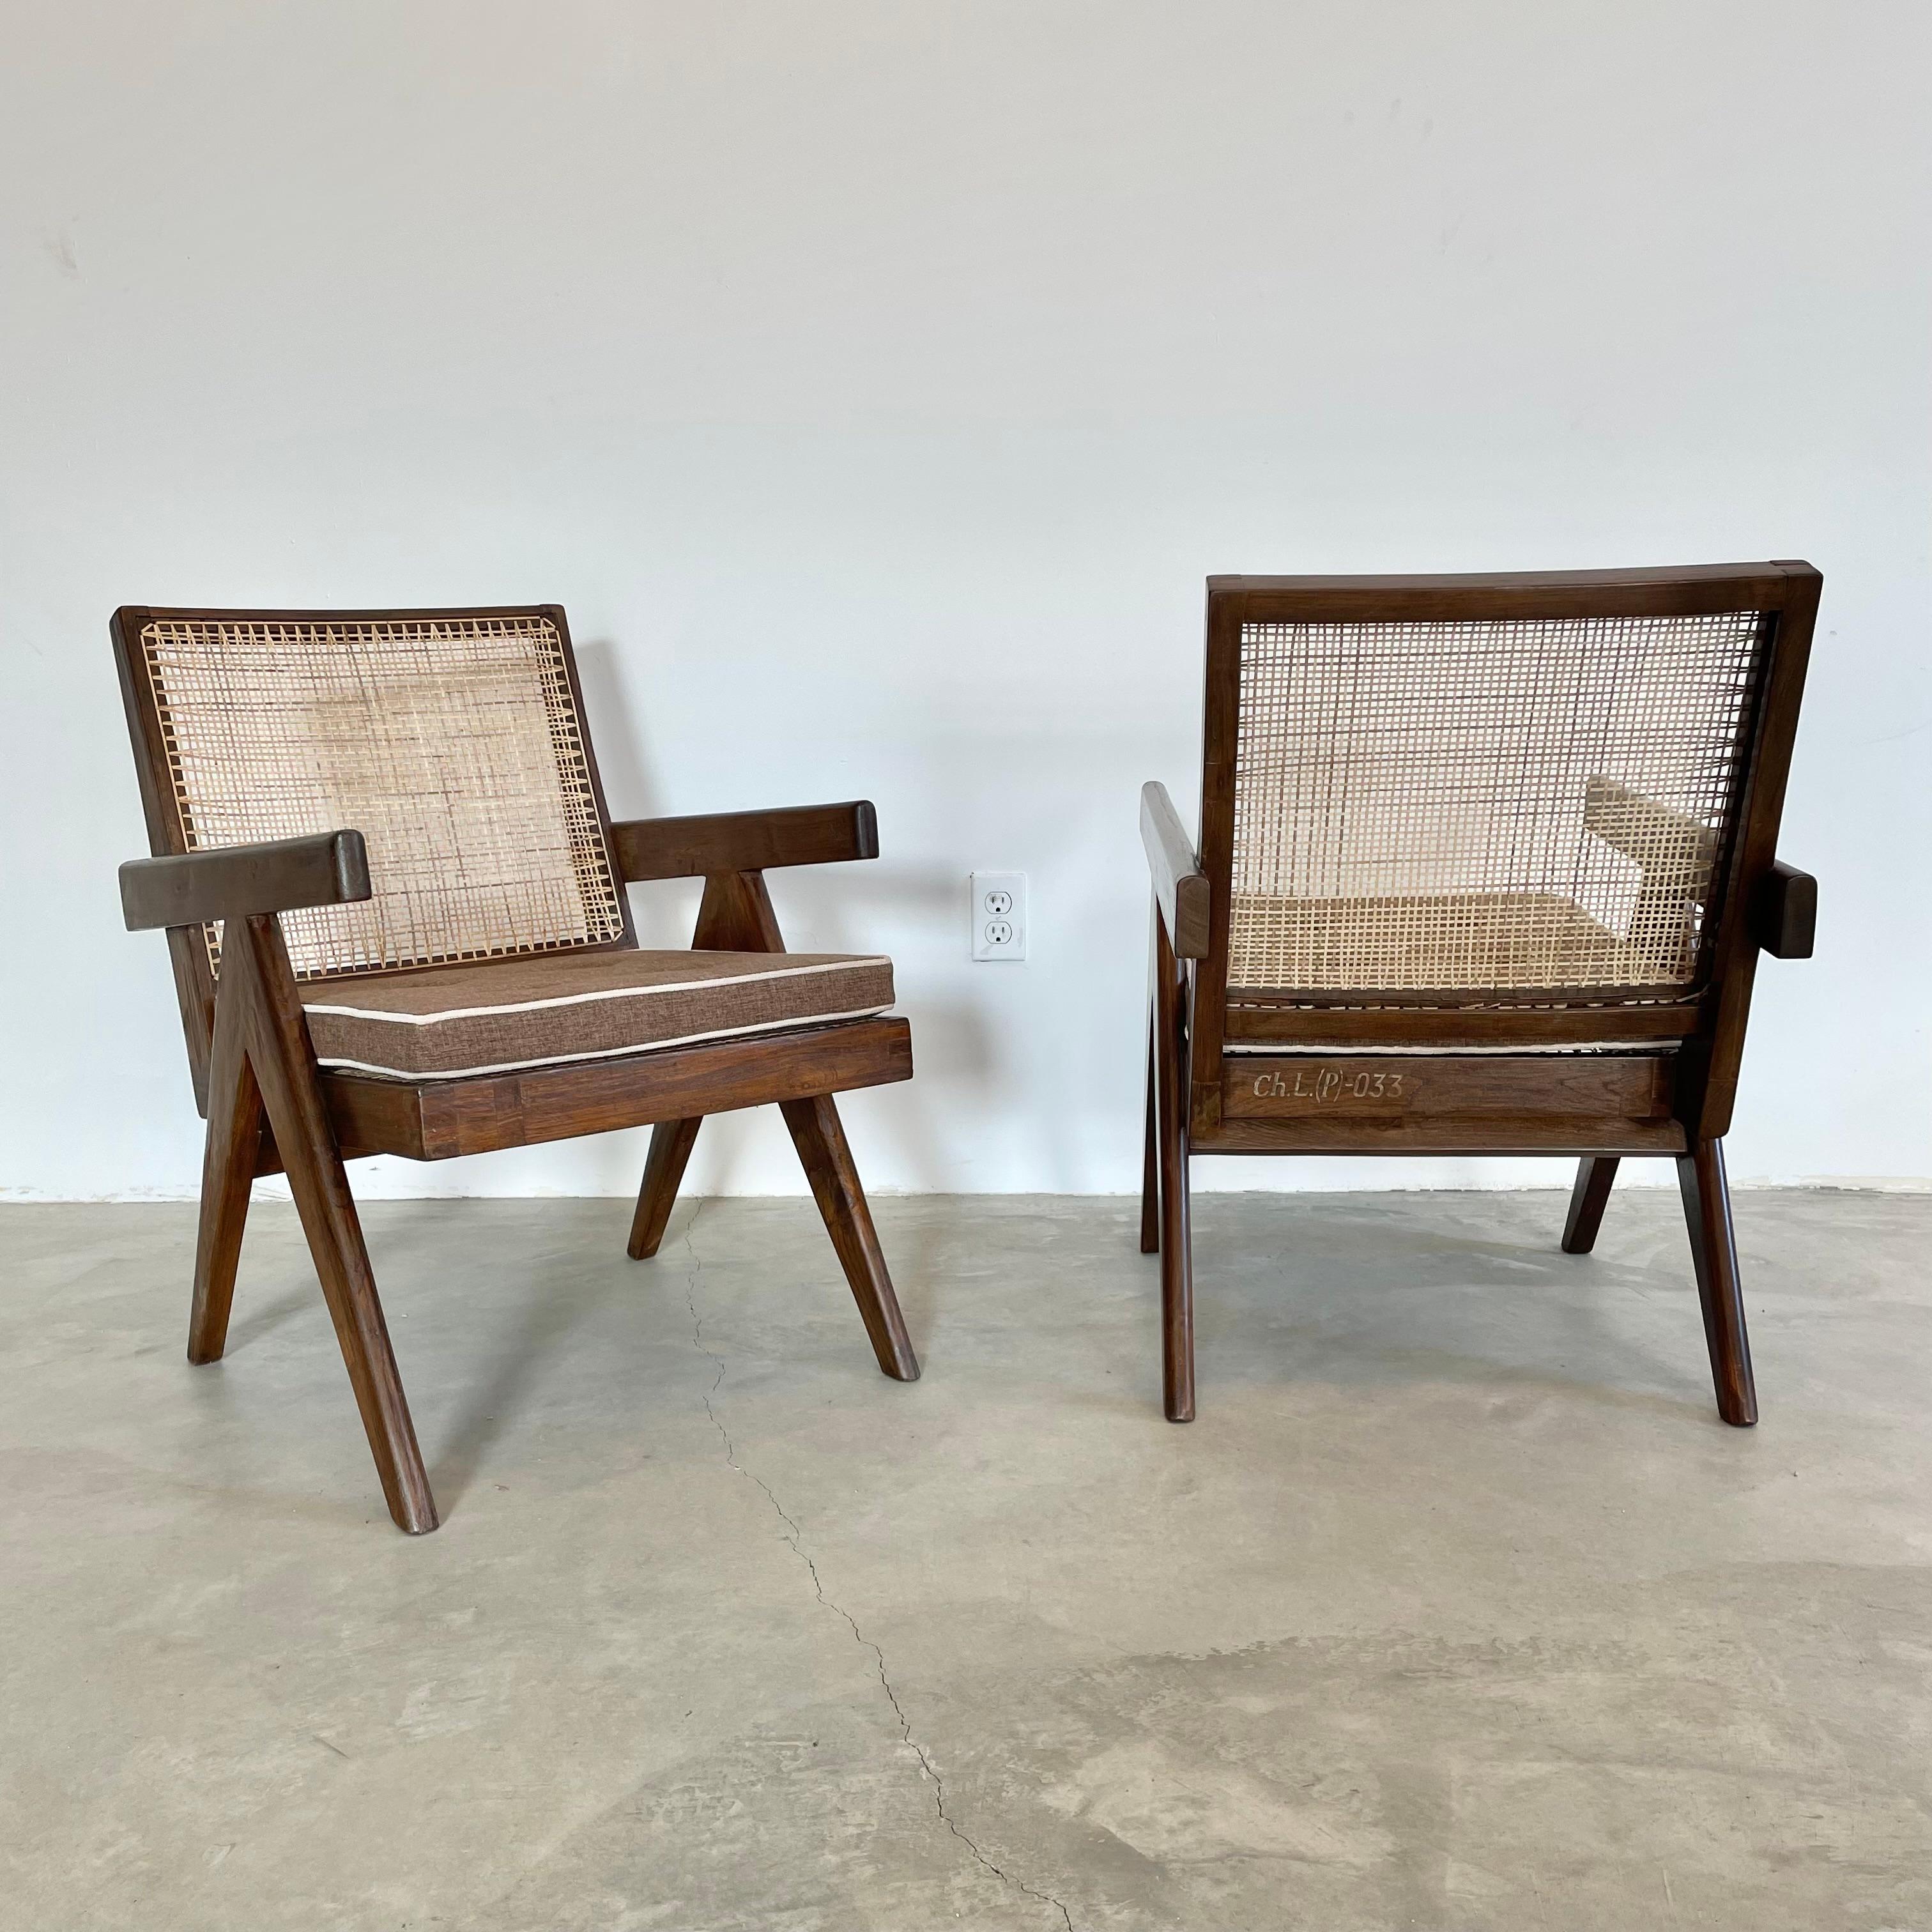 Indian Pierre Jeanneret Easy Chairs, 1950s Chandigargh For Sale